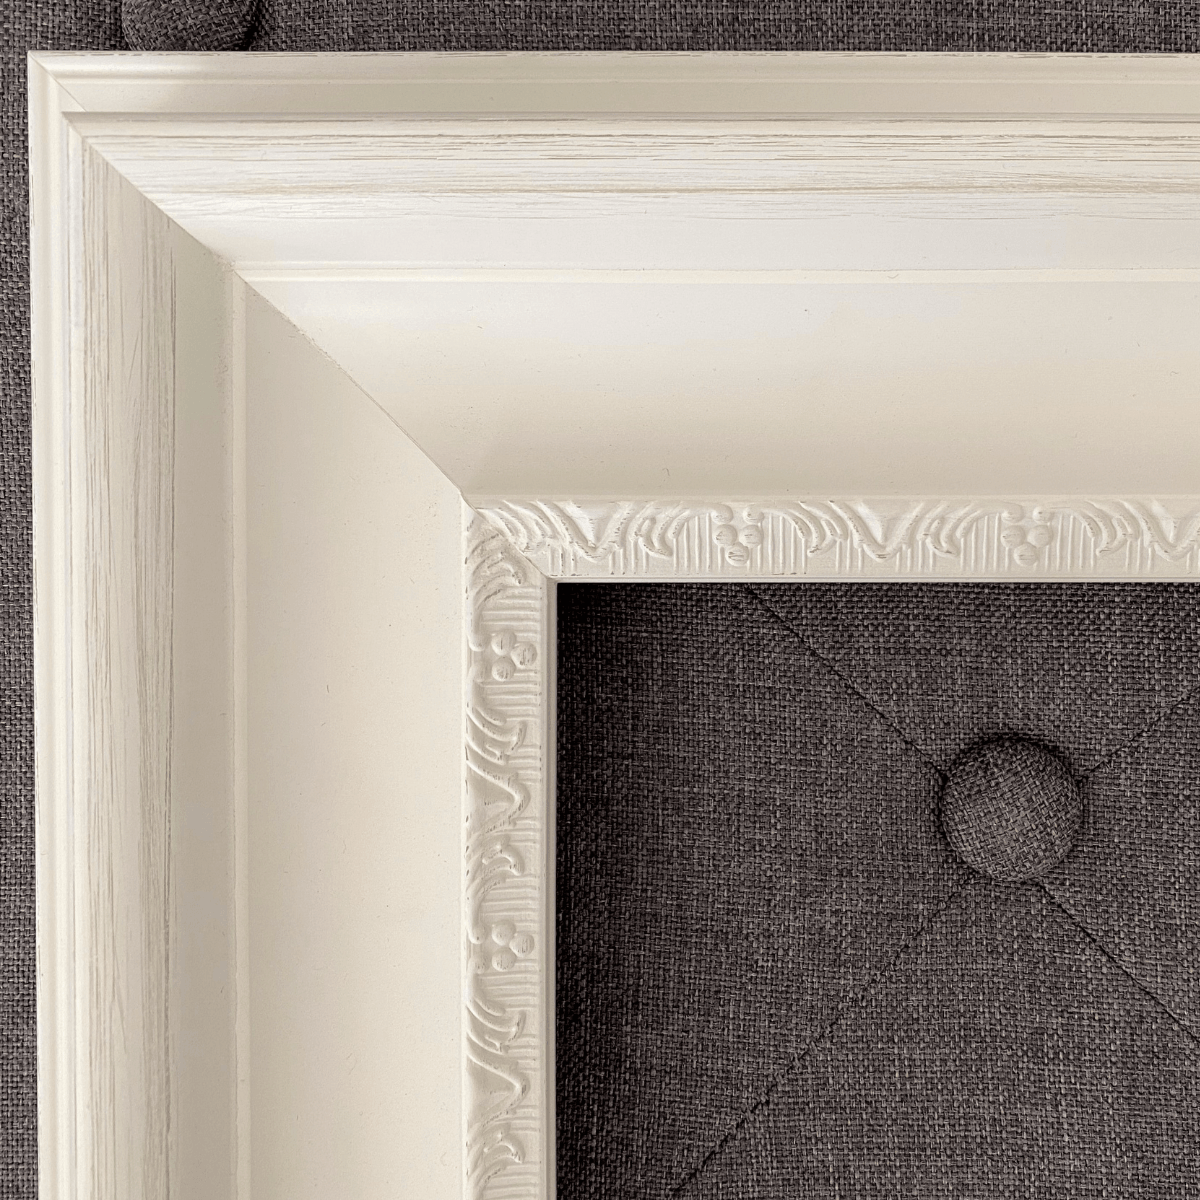 Distressed Picture Frame, Ornate Wall Baroque Frames for Canvas, Print,  Photography, Frames in Different Sizes, Cottage Chic Style, Shabby 